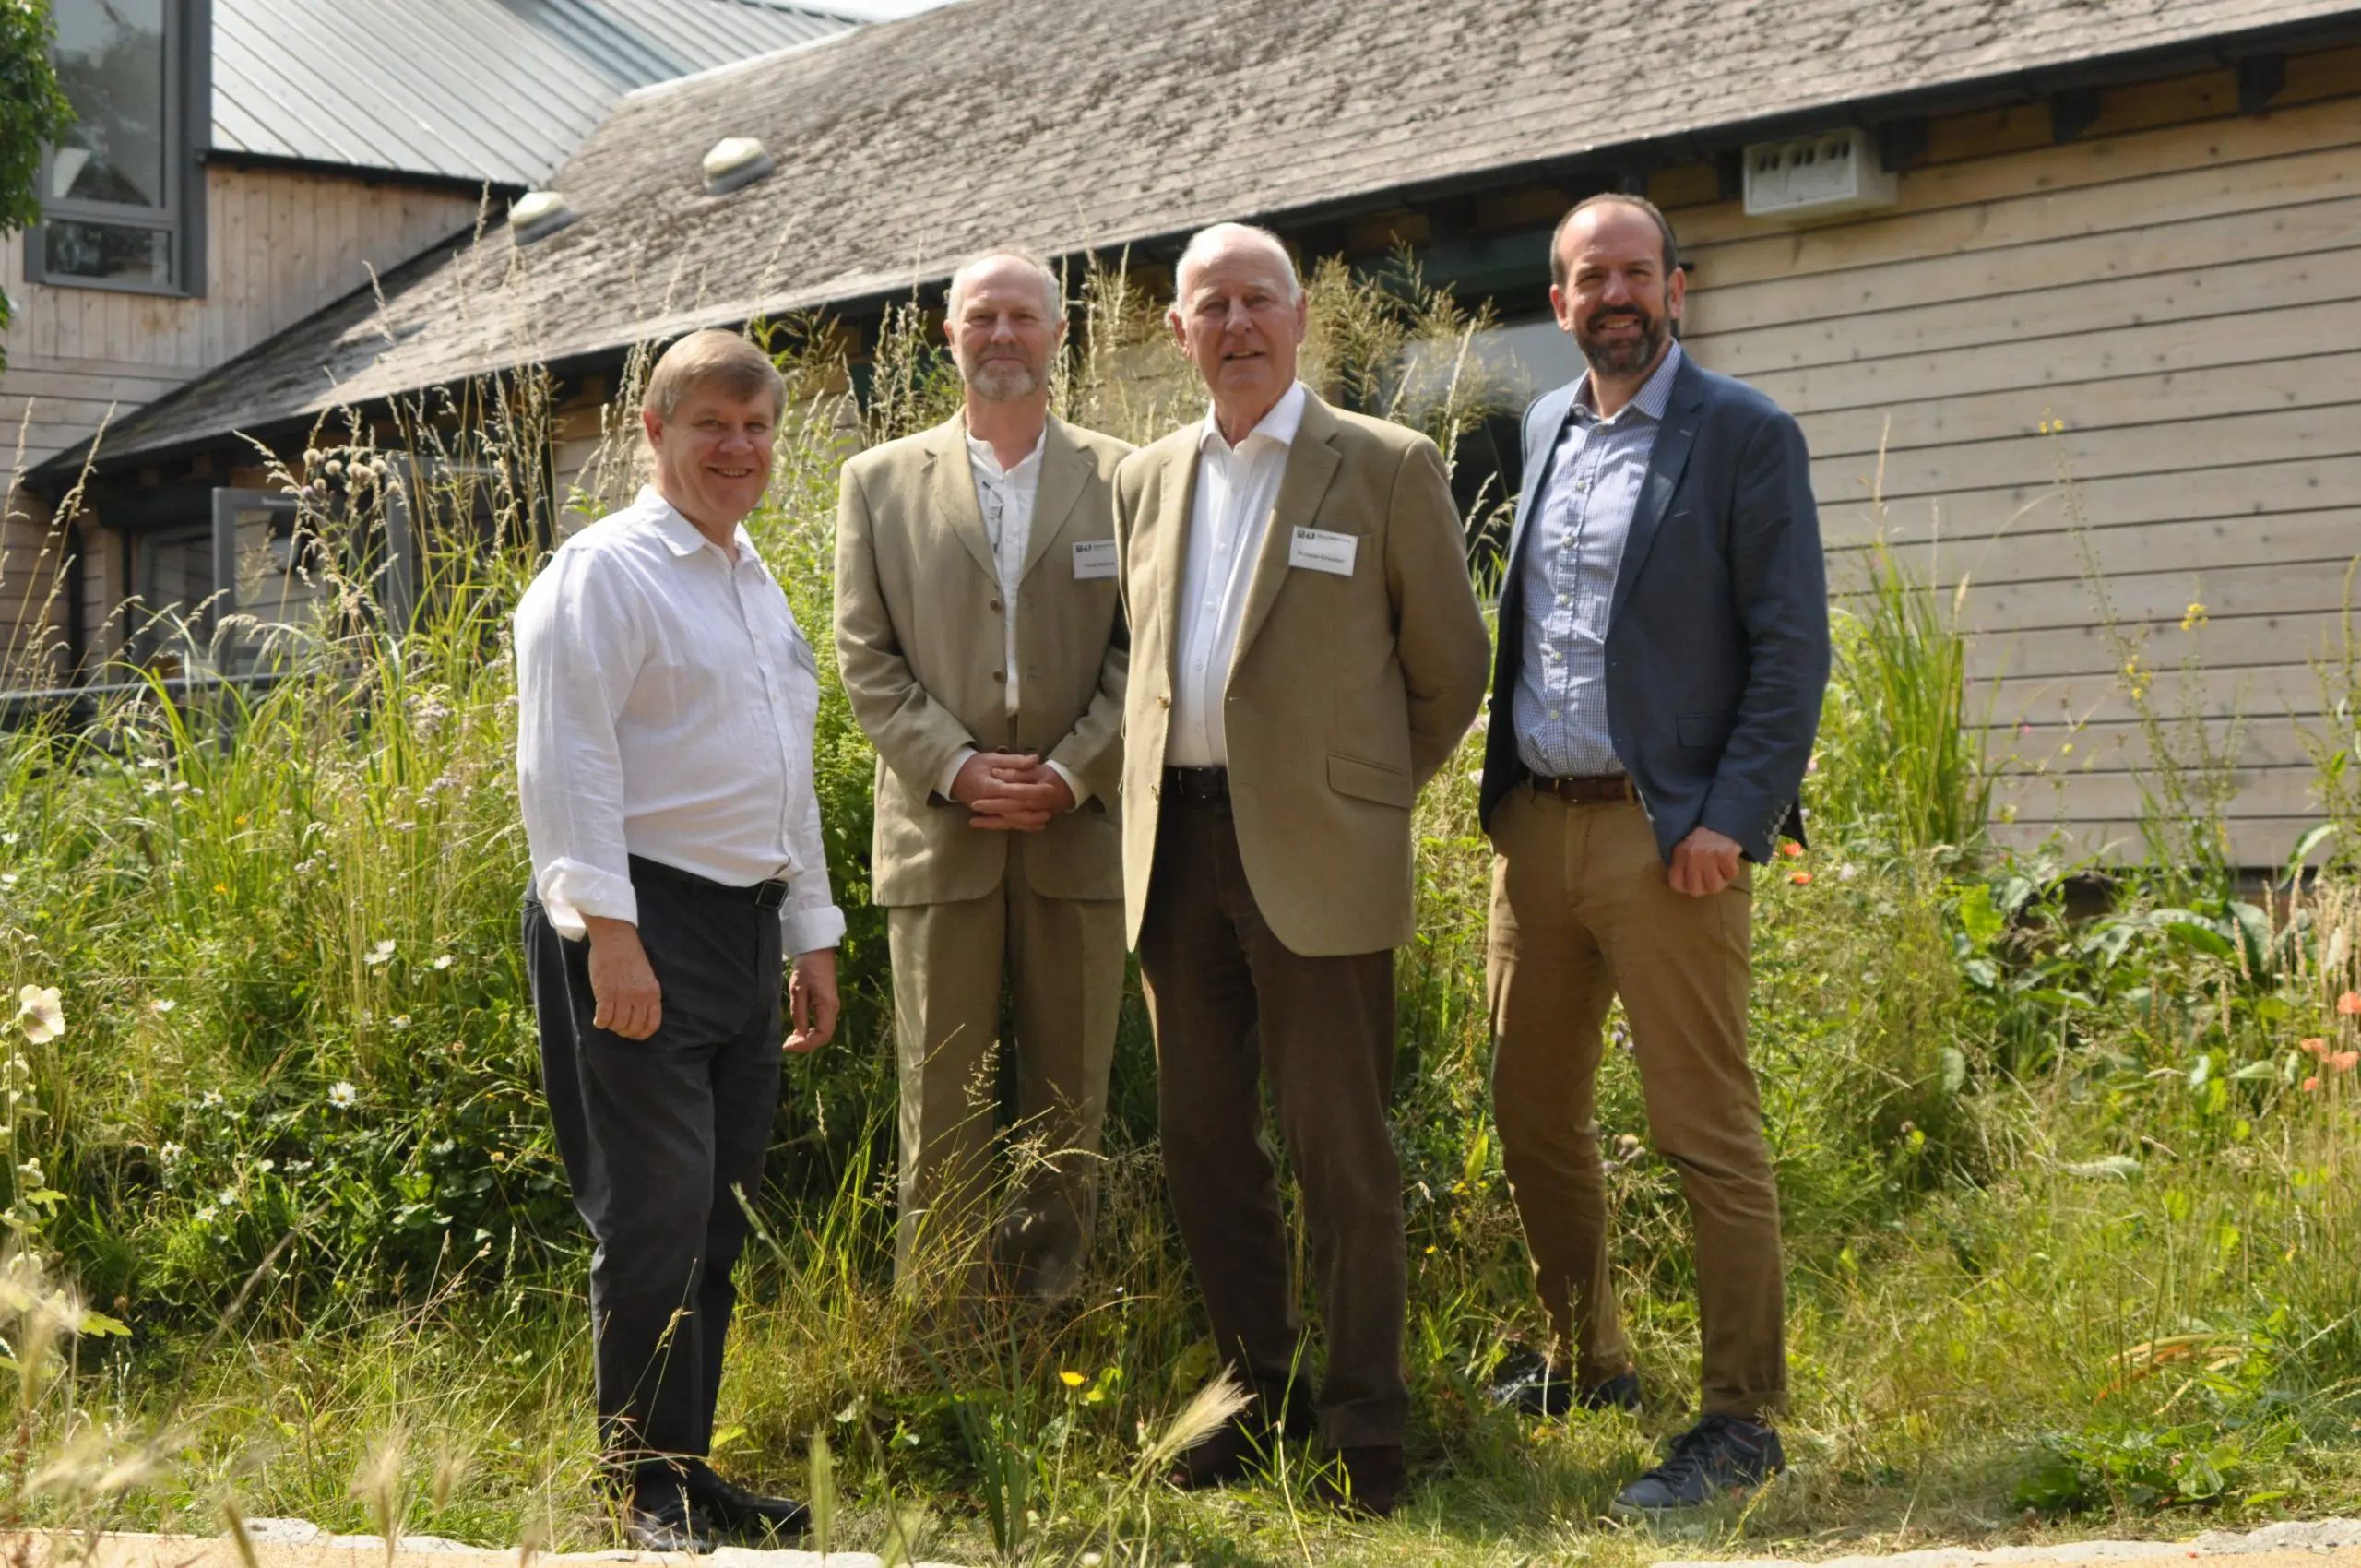 Pictured from left Richard Skehens, Grundon's former CEO; David Bullock, Chair of Trustees at Gloucestershire Wildlife Trust; Norman Grundon, Chairman of Grundon Waste Management; and Roger Mortlock, CEO of Gloucestershire Wildlife Trust.